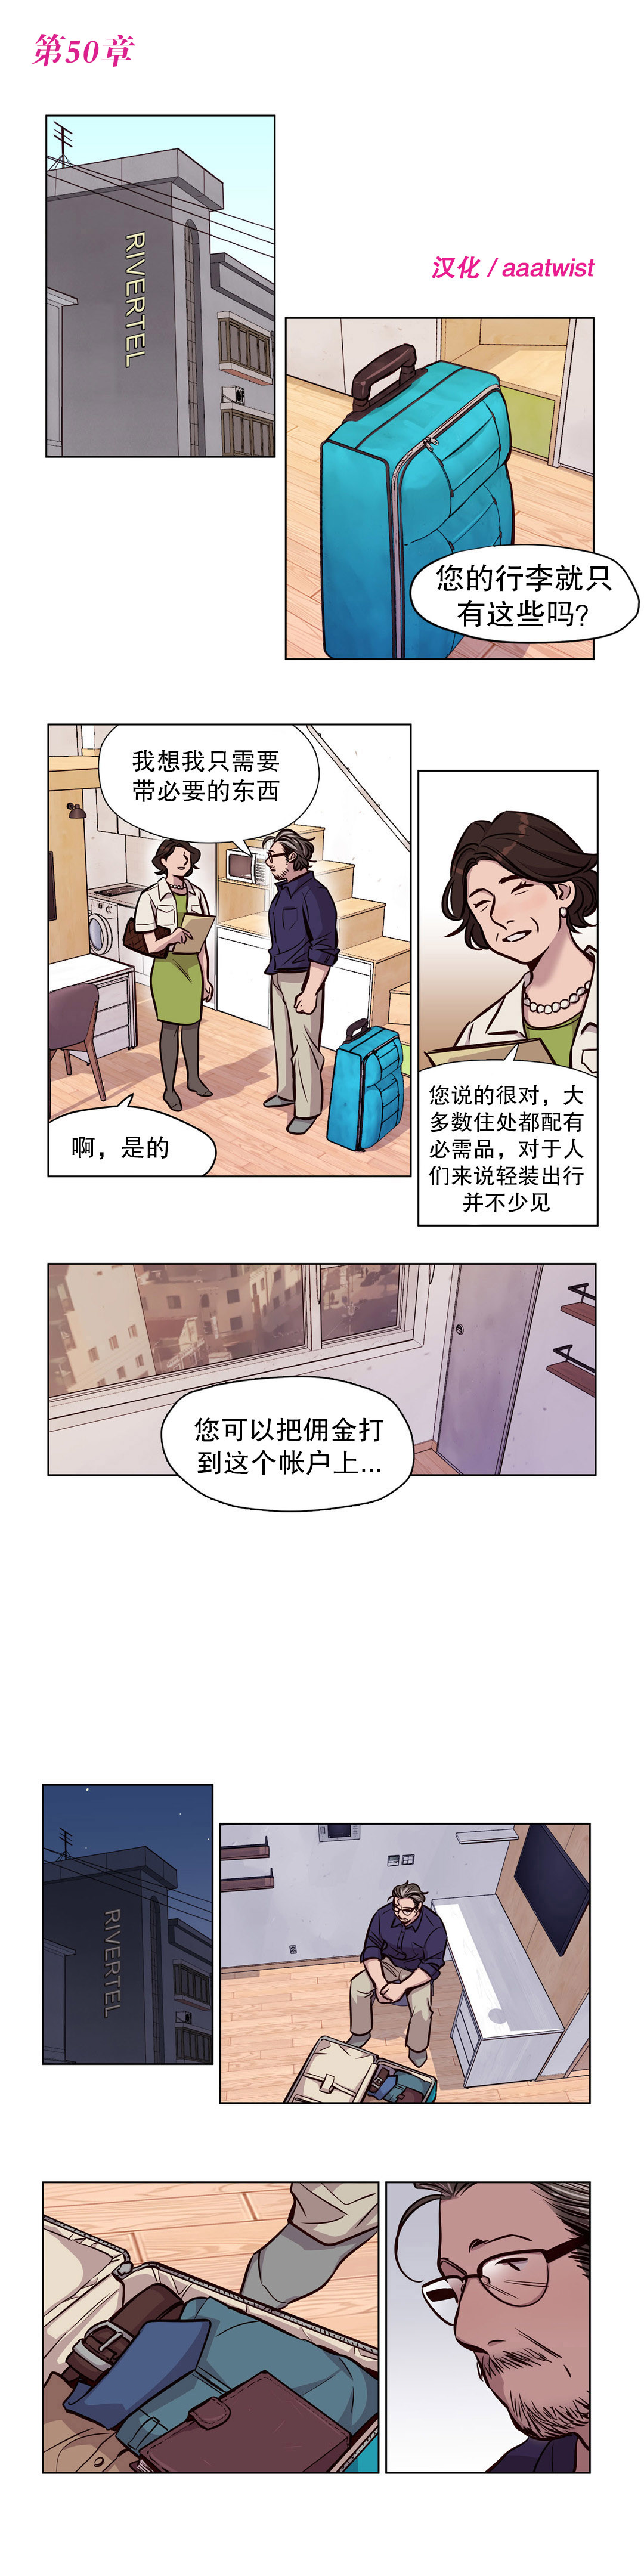 [Ramjak] 赎罪营(Atonement Camp) Ch.50-52 (Chinese) 